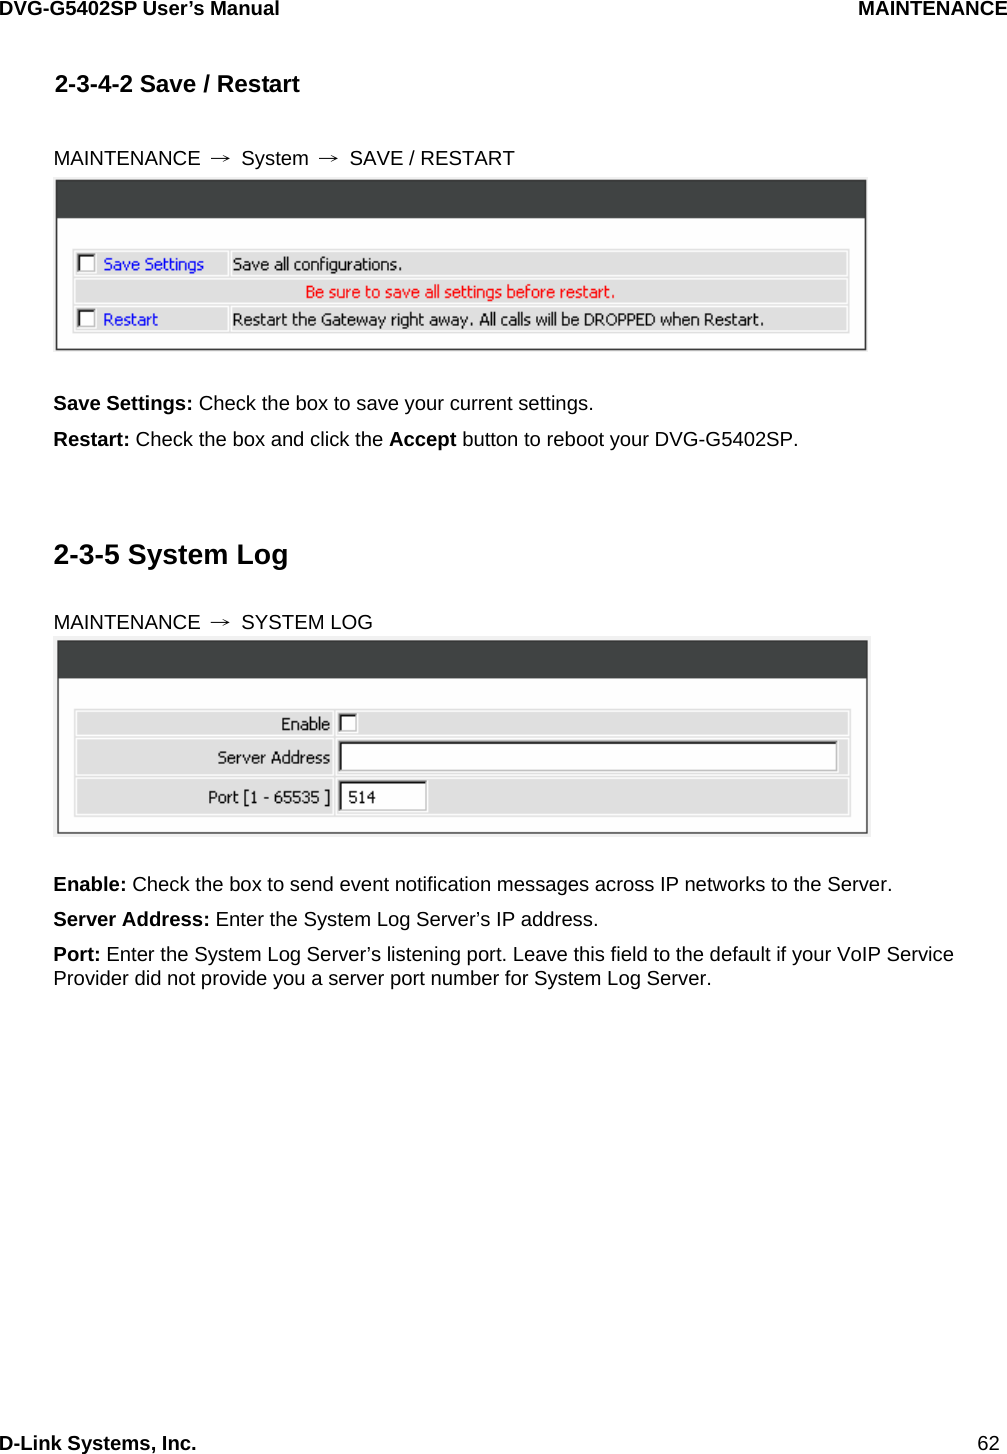 DVG-G5402SP User’s Manual                                     MAINTENANCE D-Link Systems, Inc.                                                                             62 2-3-4-2 Save / Restart  MAINTENANCE  → System → SAVE / RESTART   Save Settings: Check the box to save your current settings. Restart: Check the box and click the Accept button to reboot your DVG-G5402SP.   2-3-5 System Log  MAINTENANCE  → SYSTEM LOG   Enable: Check the box to send event notification messages across IP networks to the Server. Server Address: Enter the System Log Server’s IP address. Port: Enter the System Log Server’s listening port. Leave this field to the default if your VoIP Service Provider did not provide you a server port number for System Log Server.  